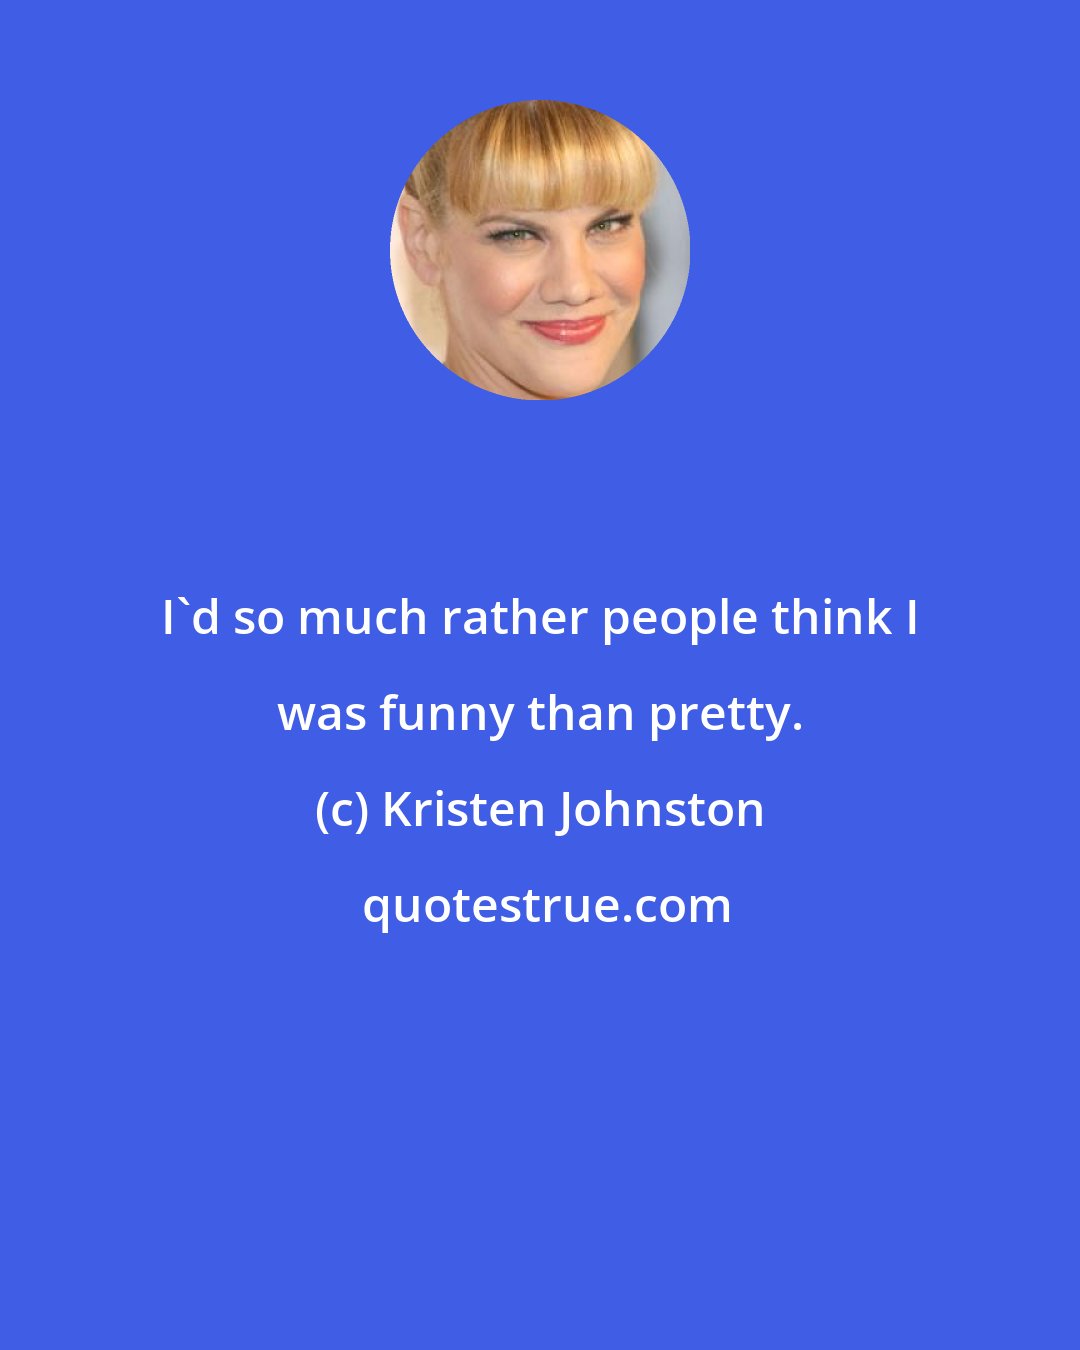 Kristen Johnston: I'd so much rather people think I was funny than pretty.